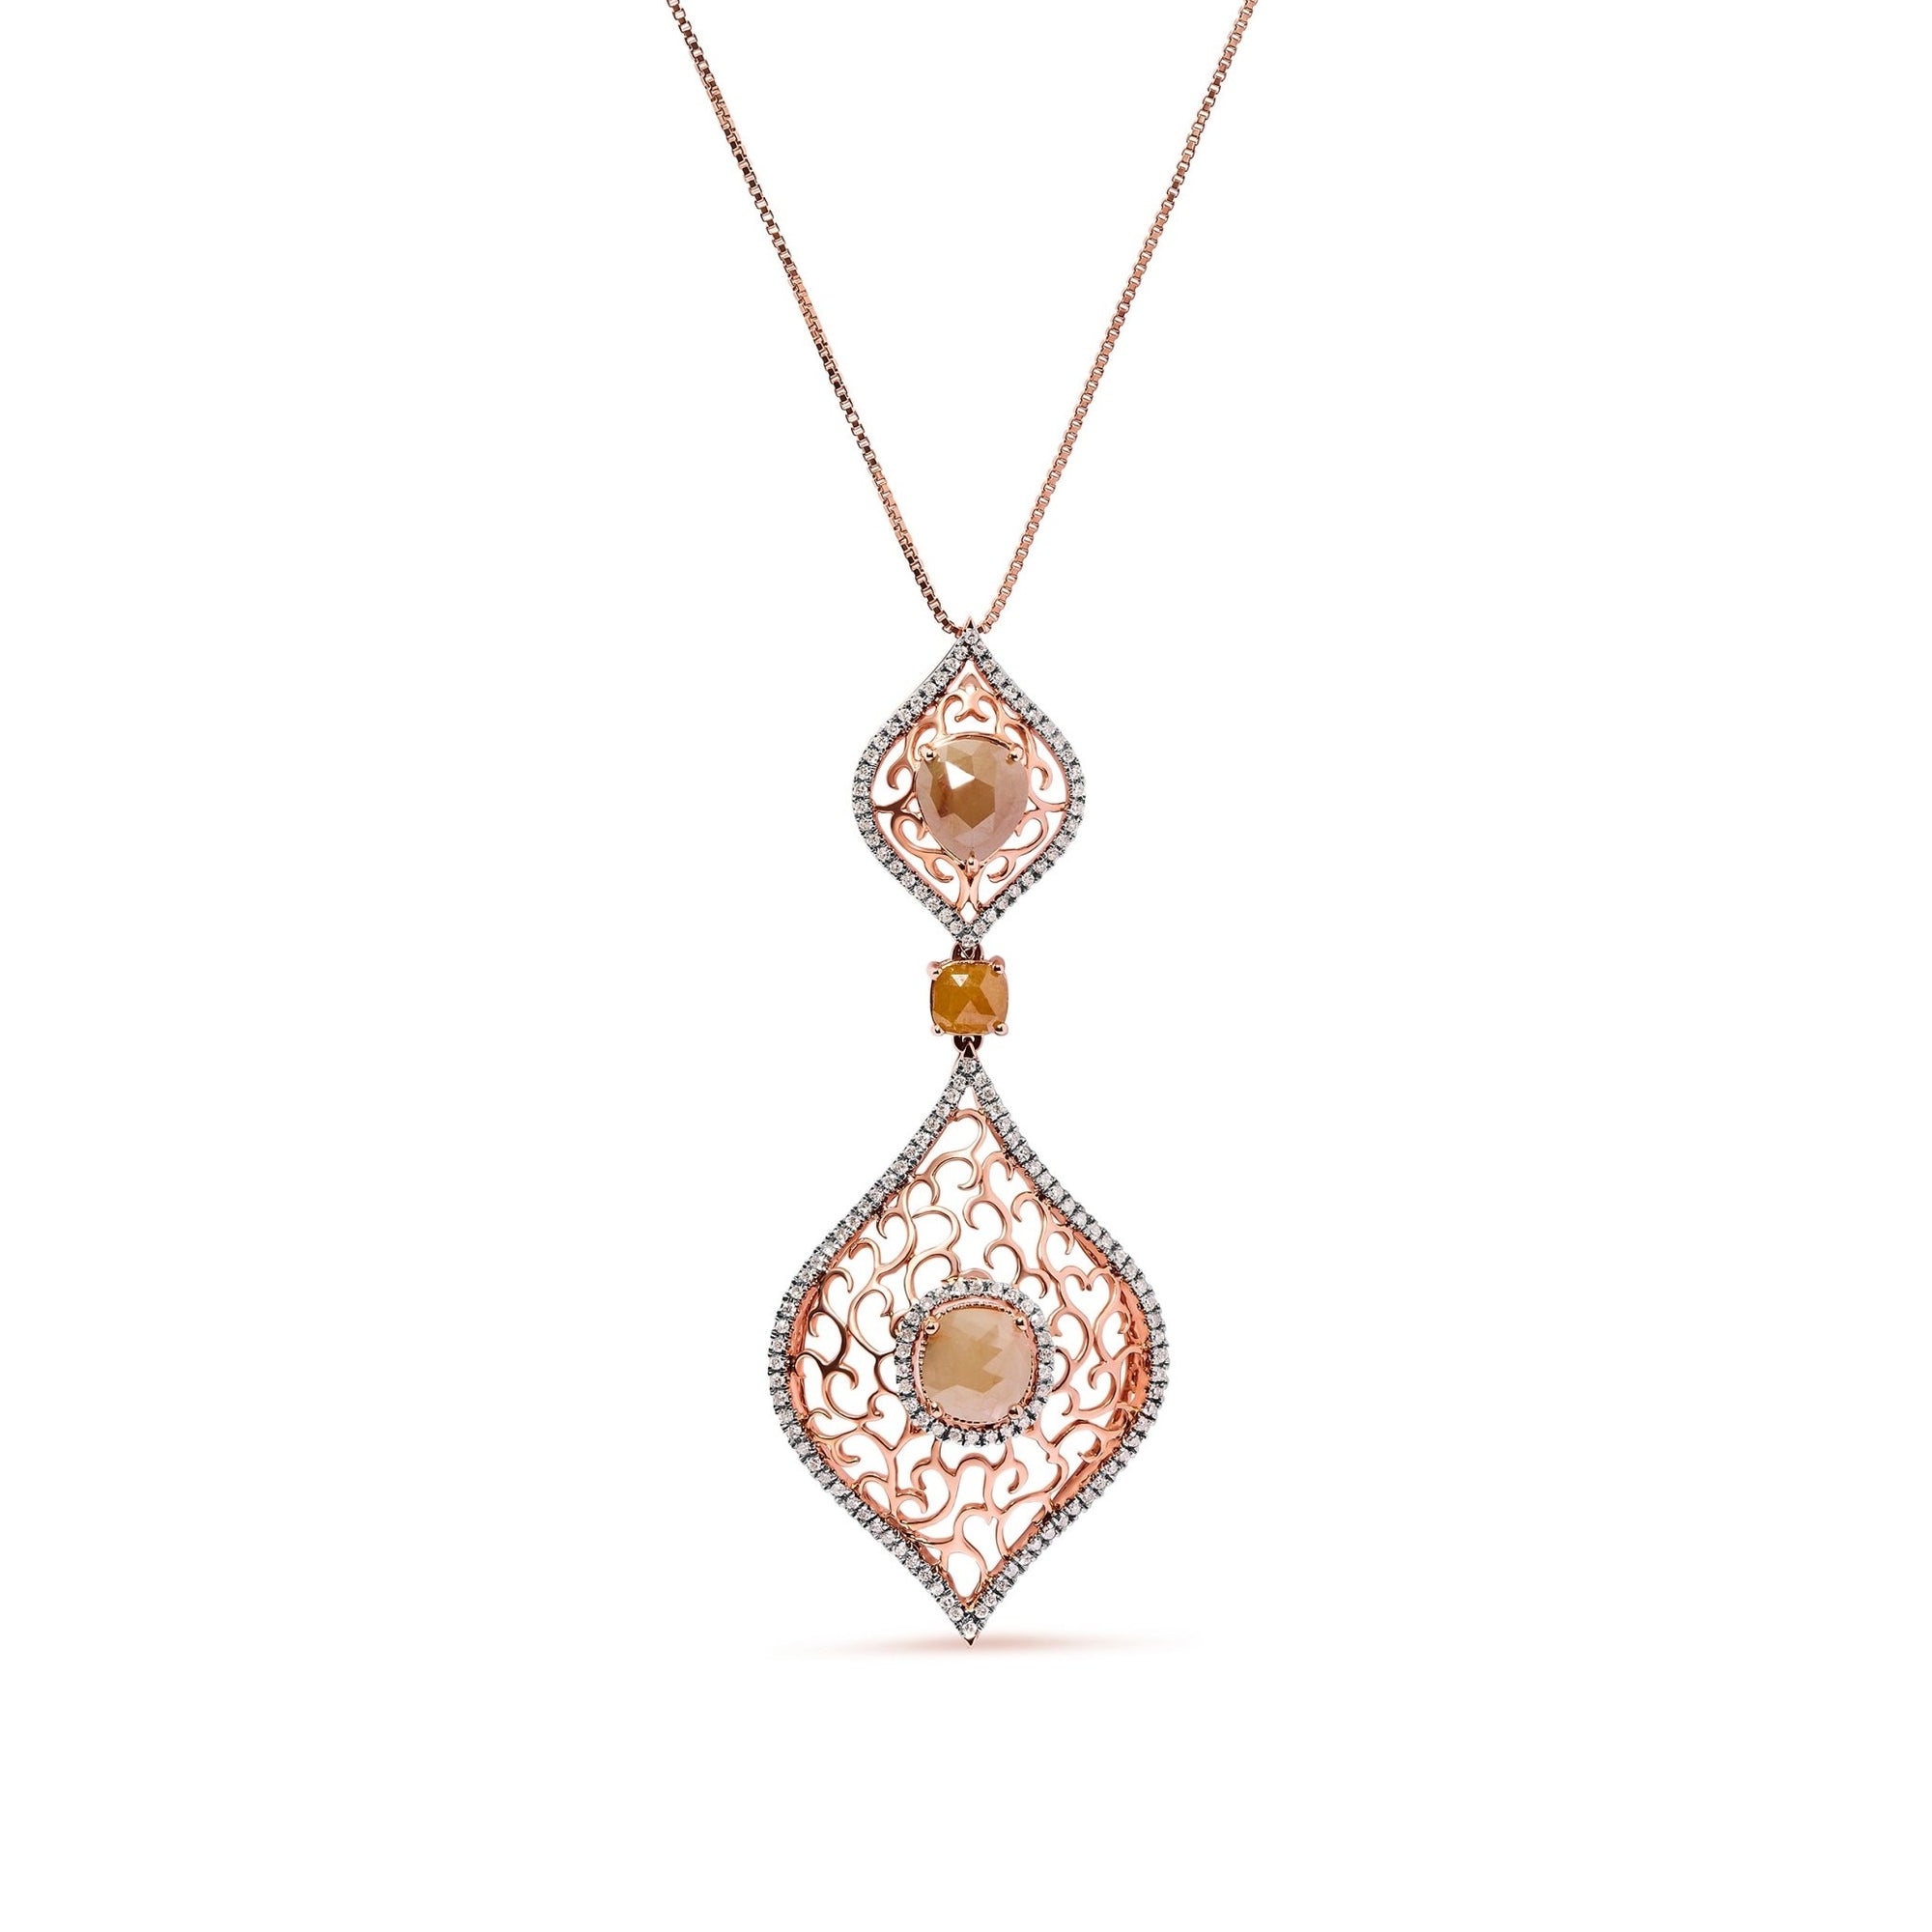 14K Rose Gold 4 5/8 Cttw Rose Cut Diamond and White Diamond Double Floral Rhombus 18" Inch Pendant Necklace (Brown/I-J Color, I1-I2 Clarity) - LinkagejewelrydesignLinkagejewelrydesign